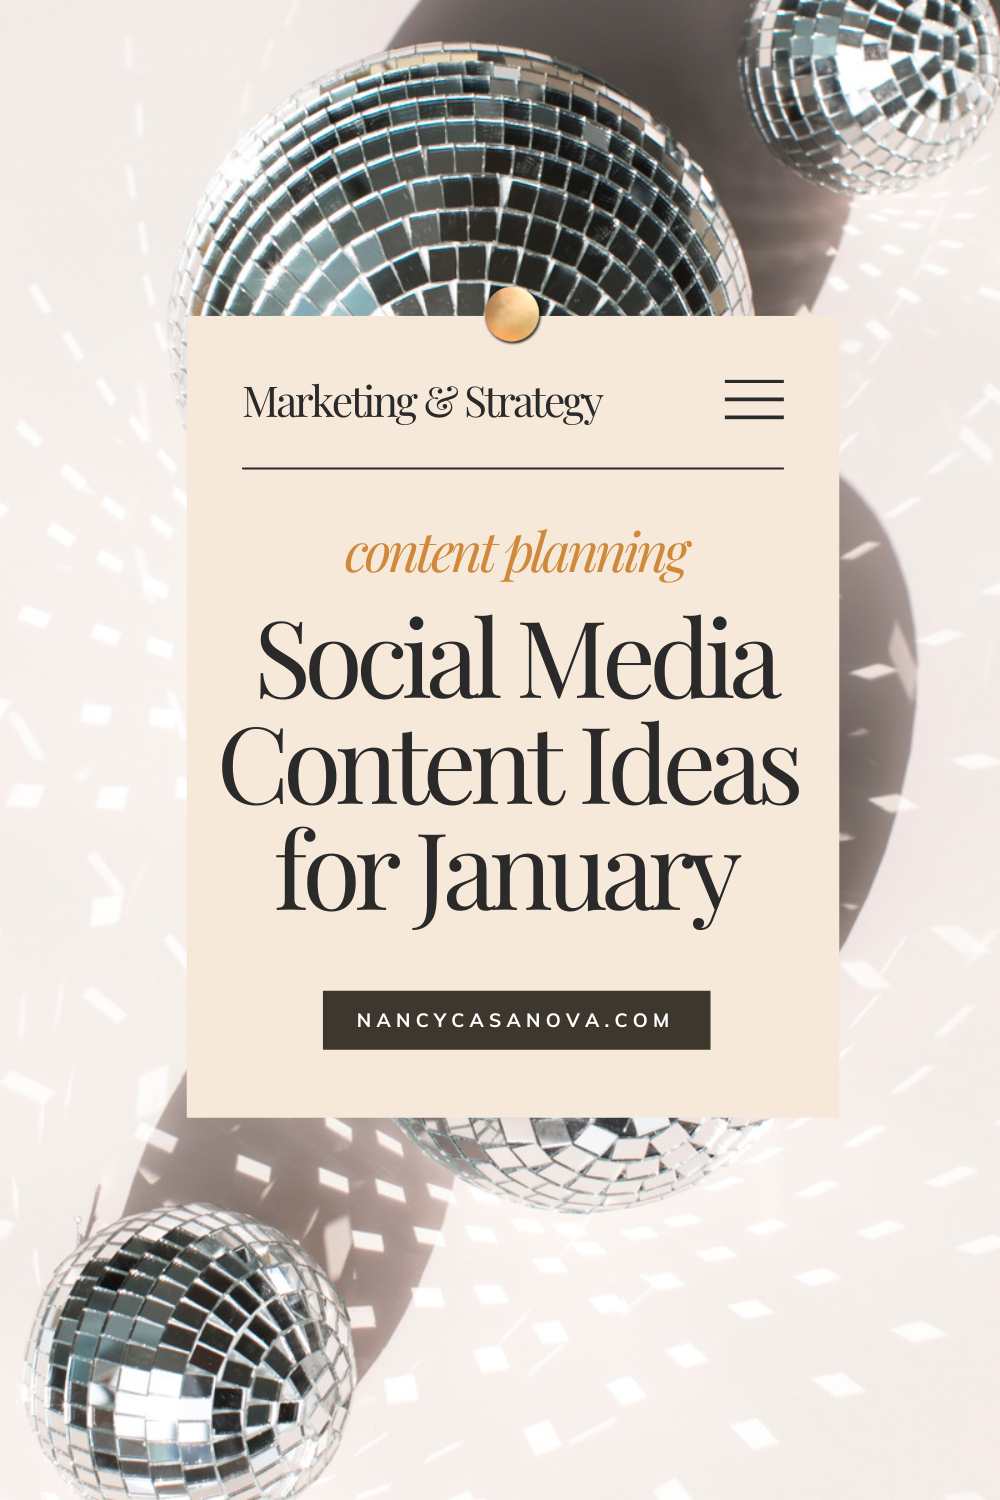 Need some content ideas for January? Here are some key dates, topics and themes that can help you generate content ideas for social media. 